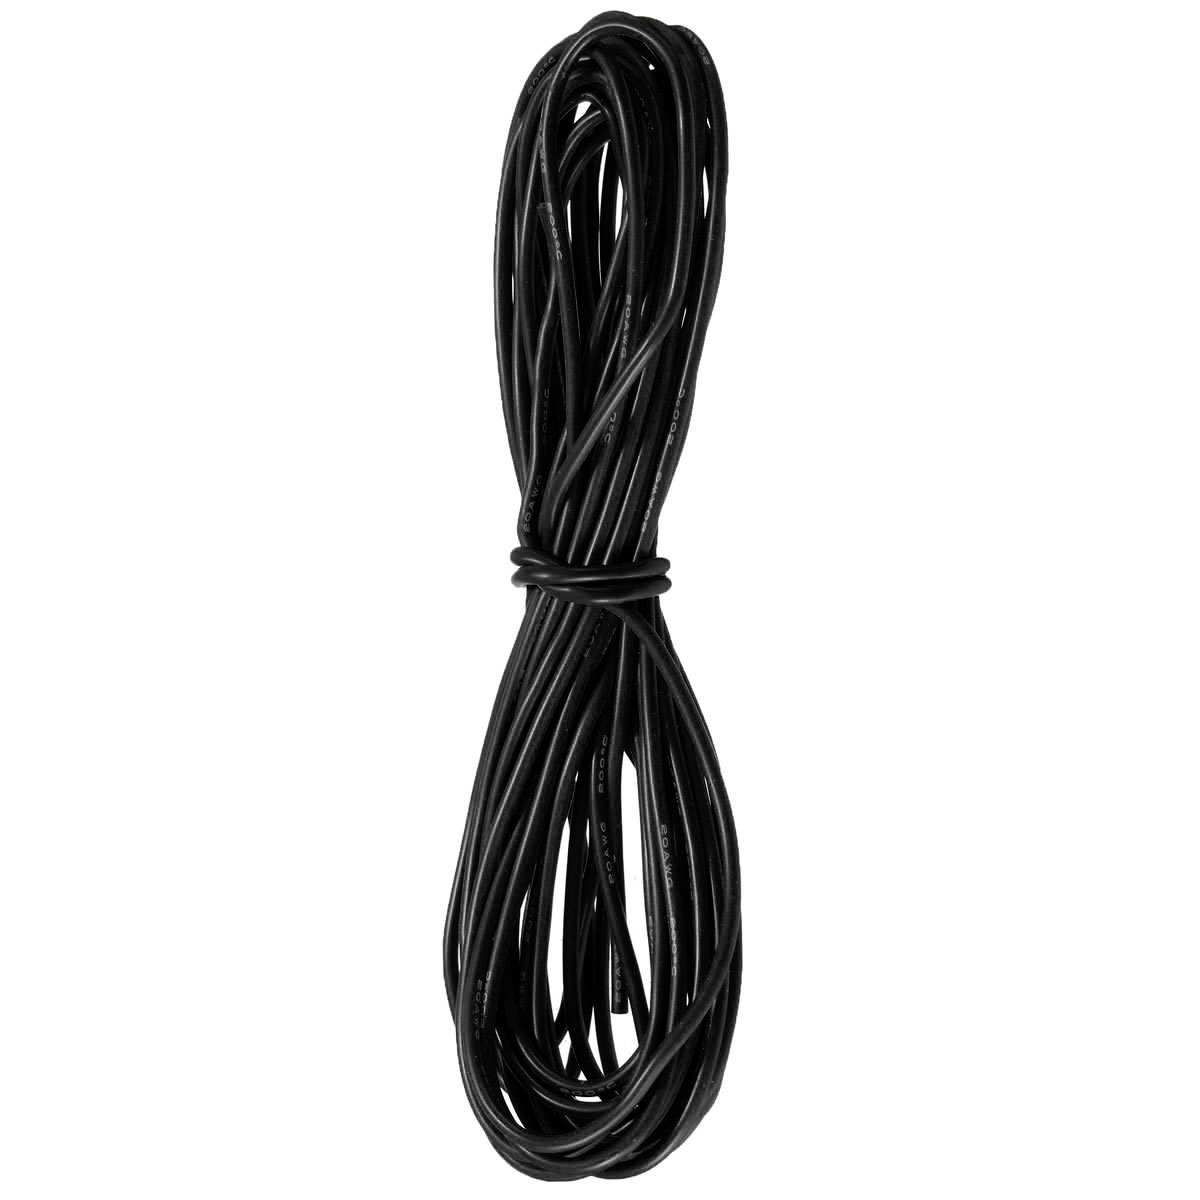 DANIU-5-Meter-Black-Silicone-Wire-Cable-10121416182022AWG-Flexible-Cable-1170293-8